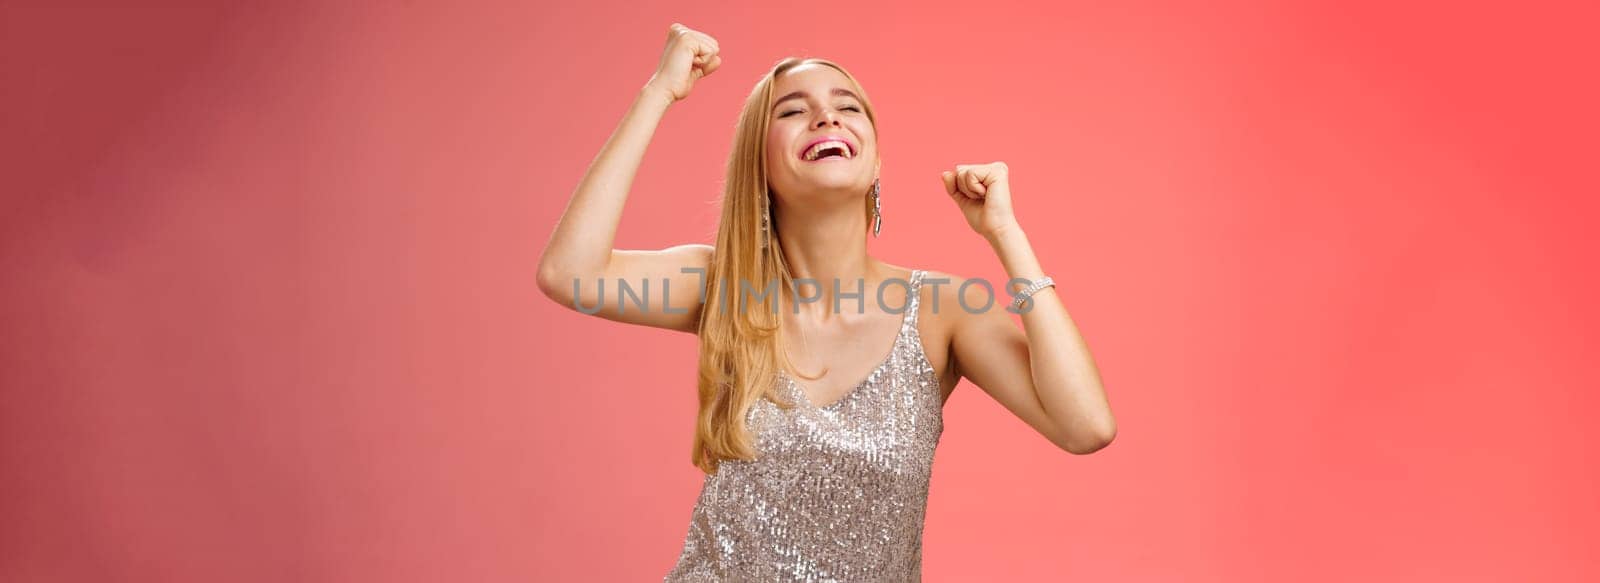 Excited carefree happy stylish blond european woman having fun dancing smiling broadly laughing happiness enjoying awesome music party rocking lighting dance-floor standing red background.